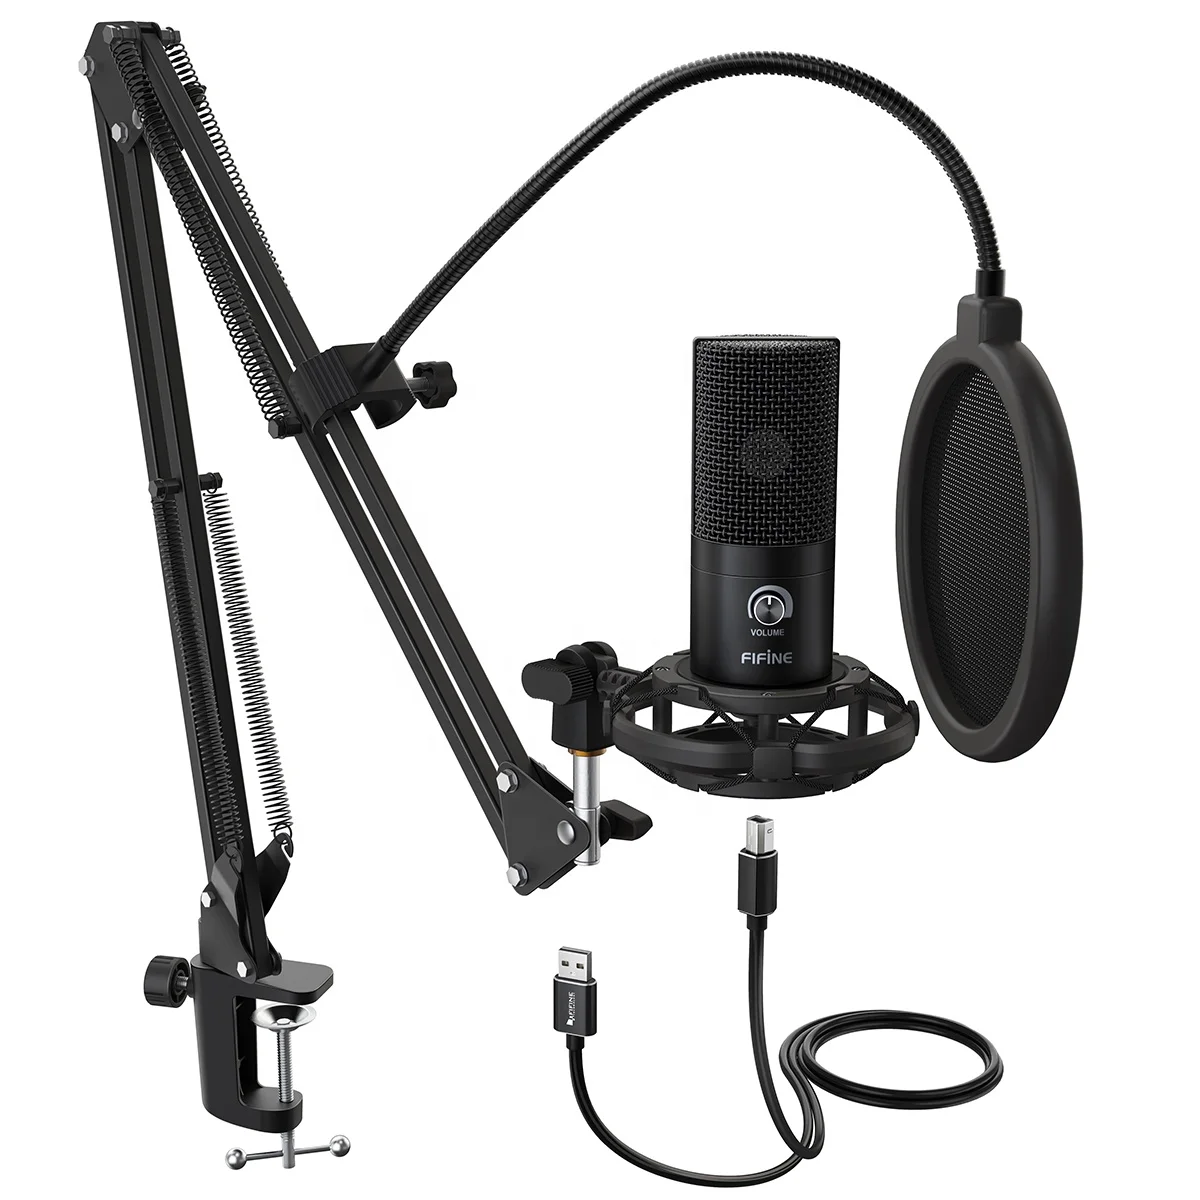 

Fifine Hot Selling T669 Professional USB Computer Condenser Mic Gaming Streaming Podcast Recording Studio Microphone